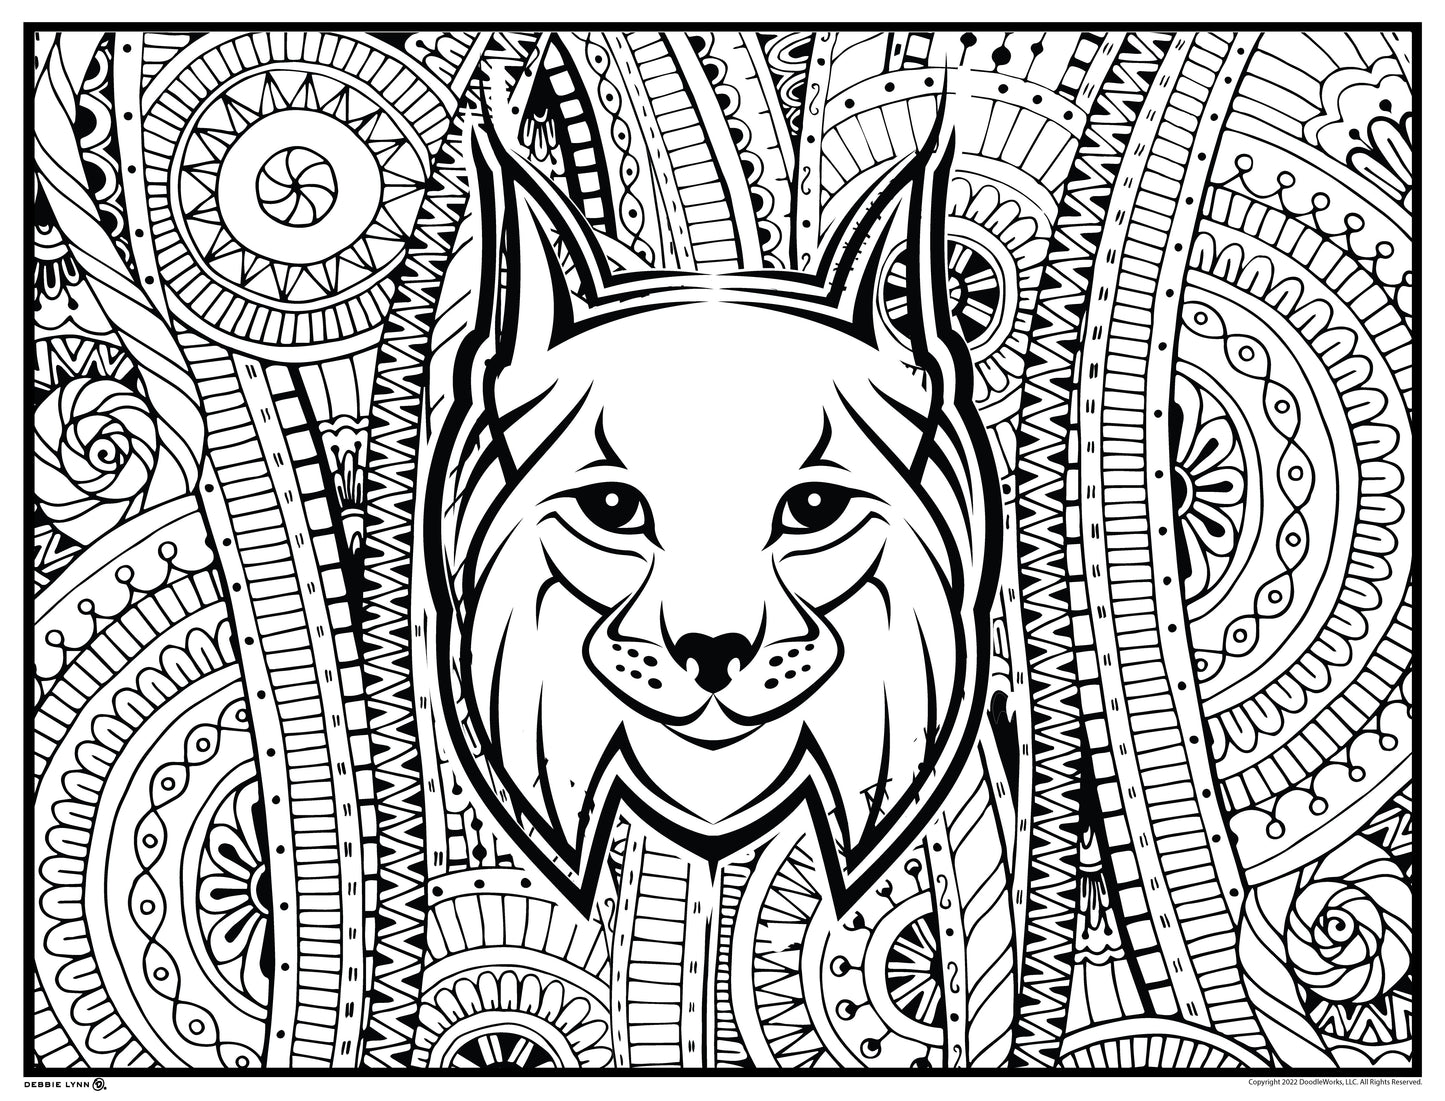 Bob Cat Lynx Personalized Giant Coloring Poster 46"x60"